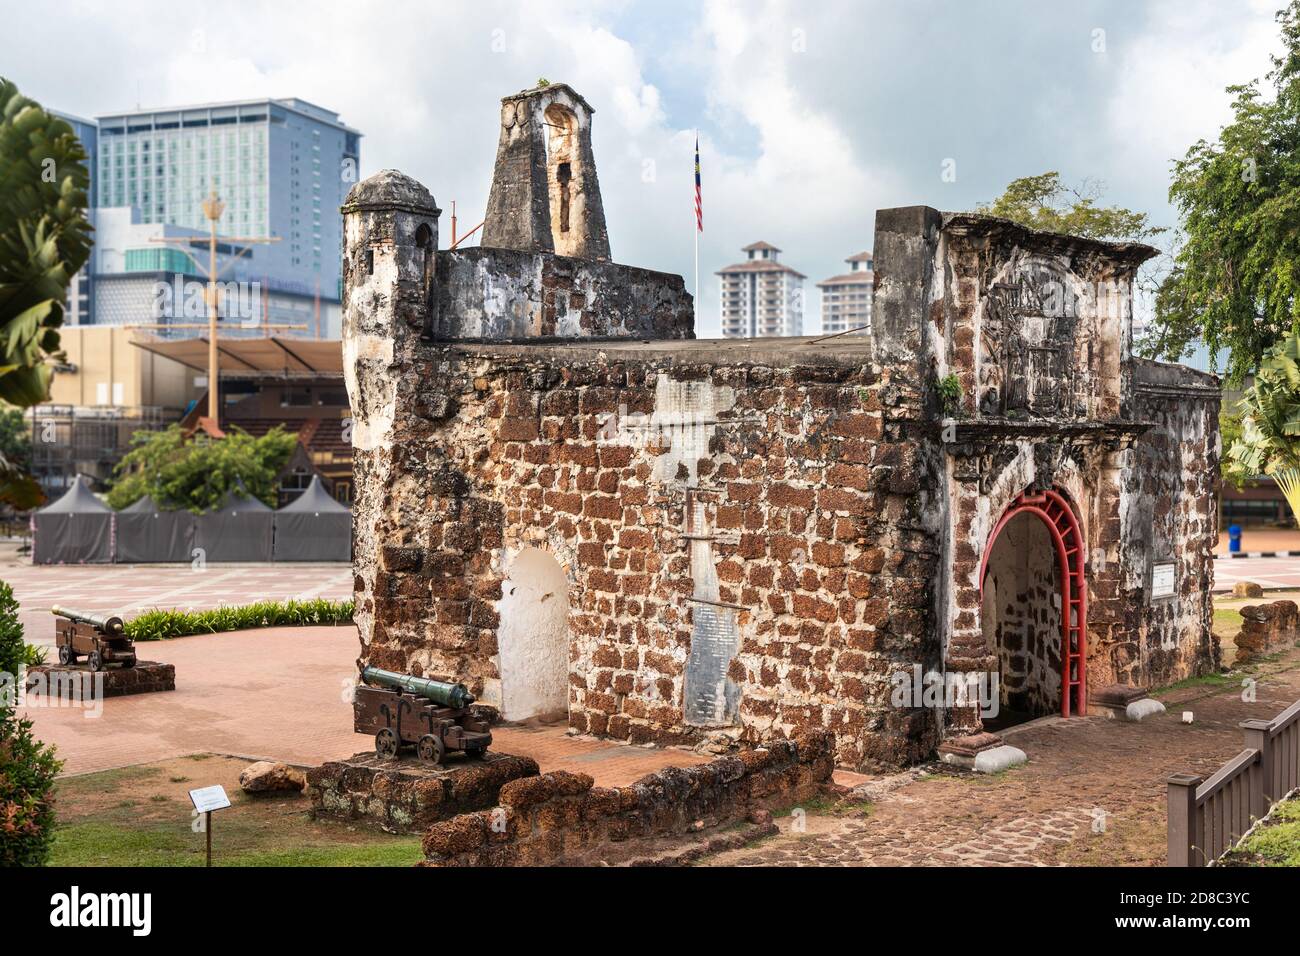 Historic ruins A Famosa is ancient Portuguese fortress. Popular tourism destination in Malacca. No people. Stock Photo